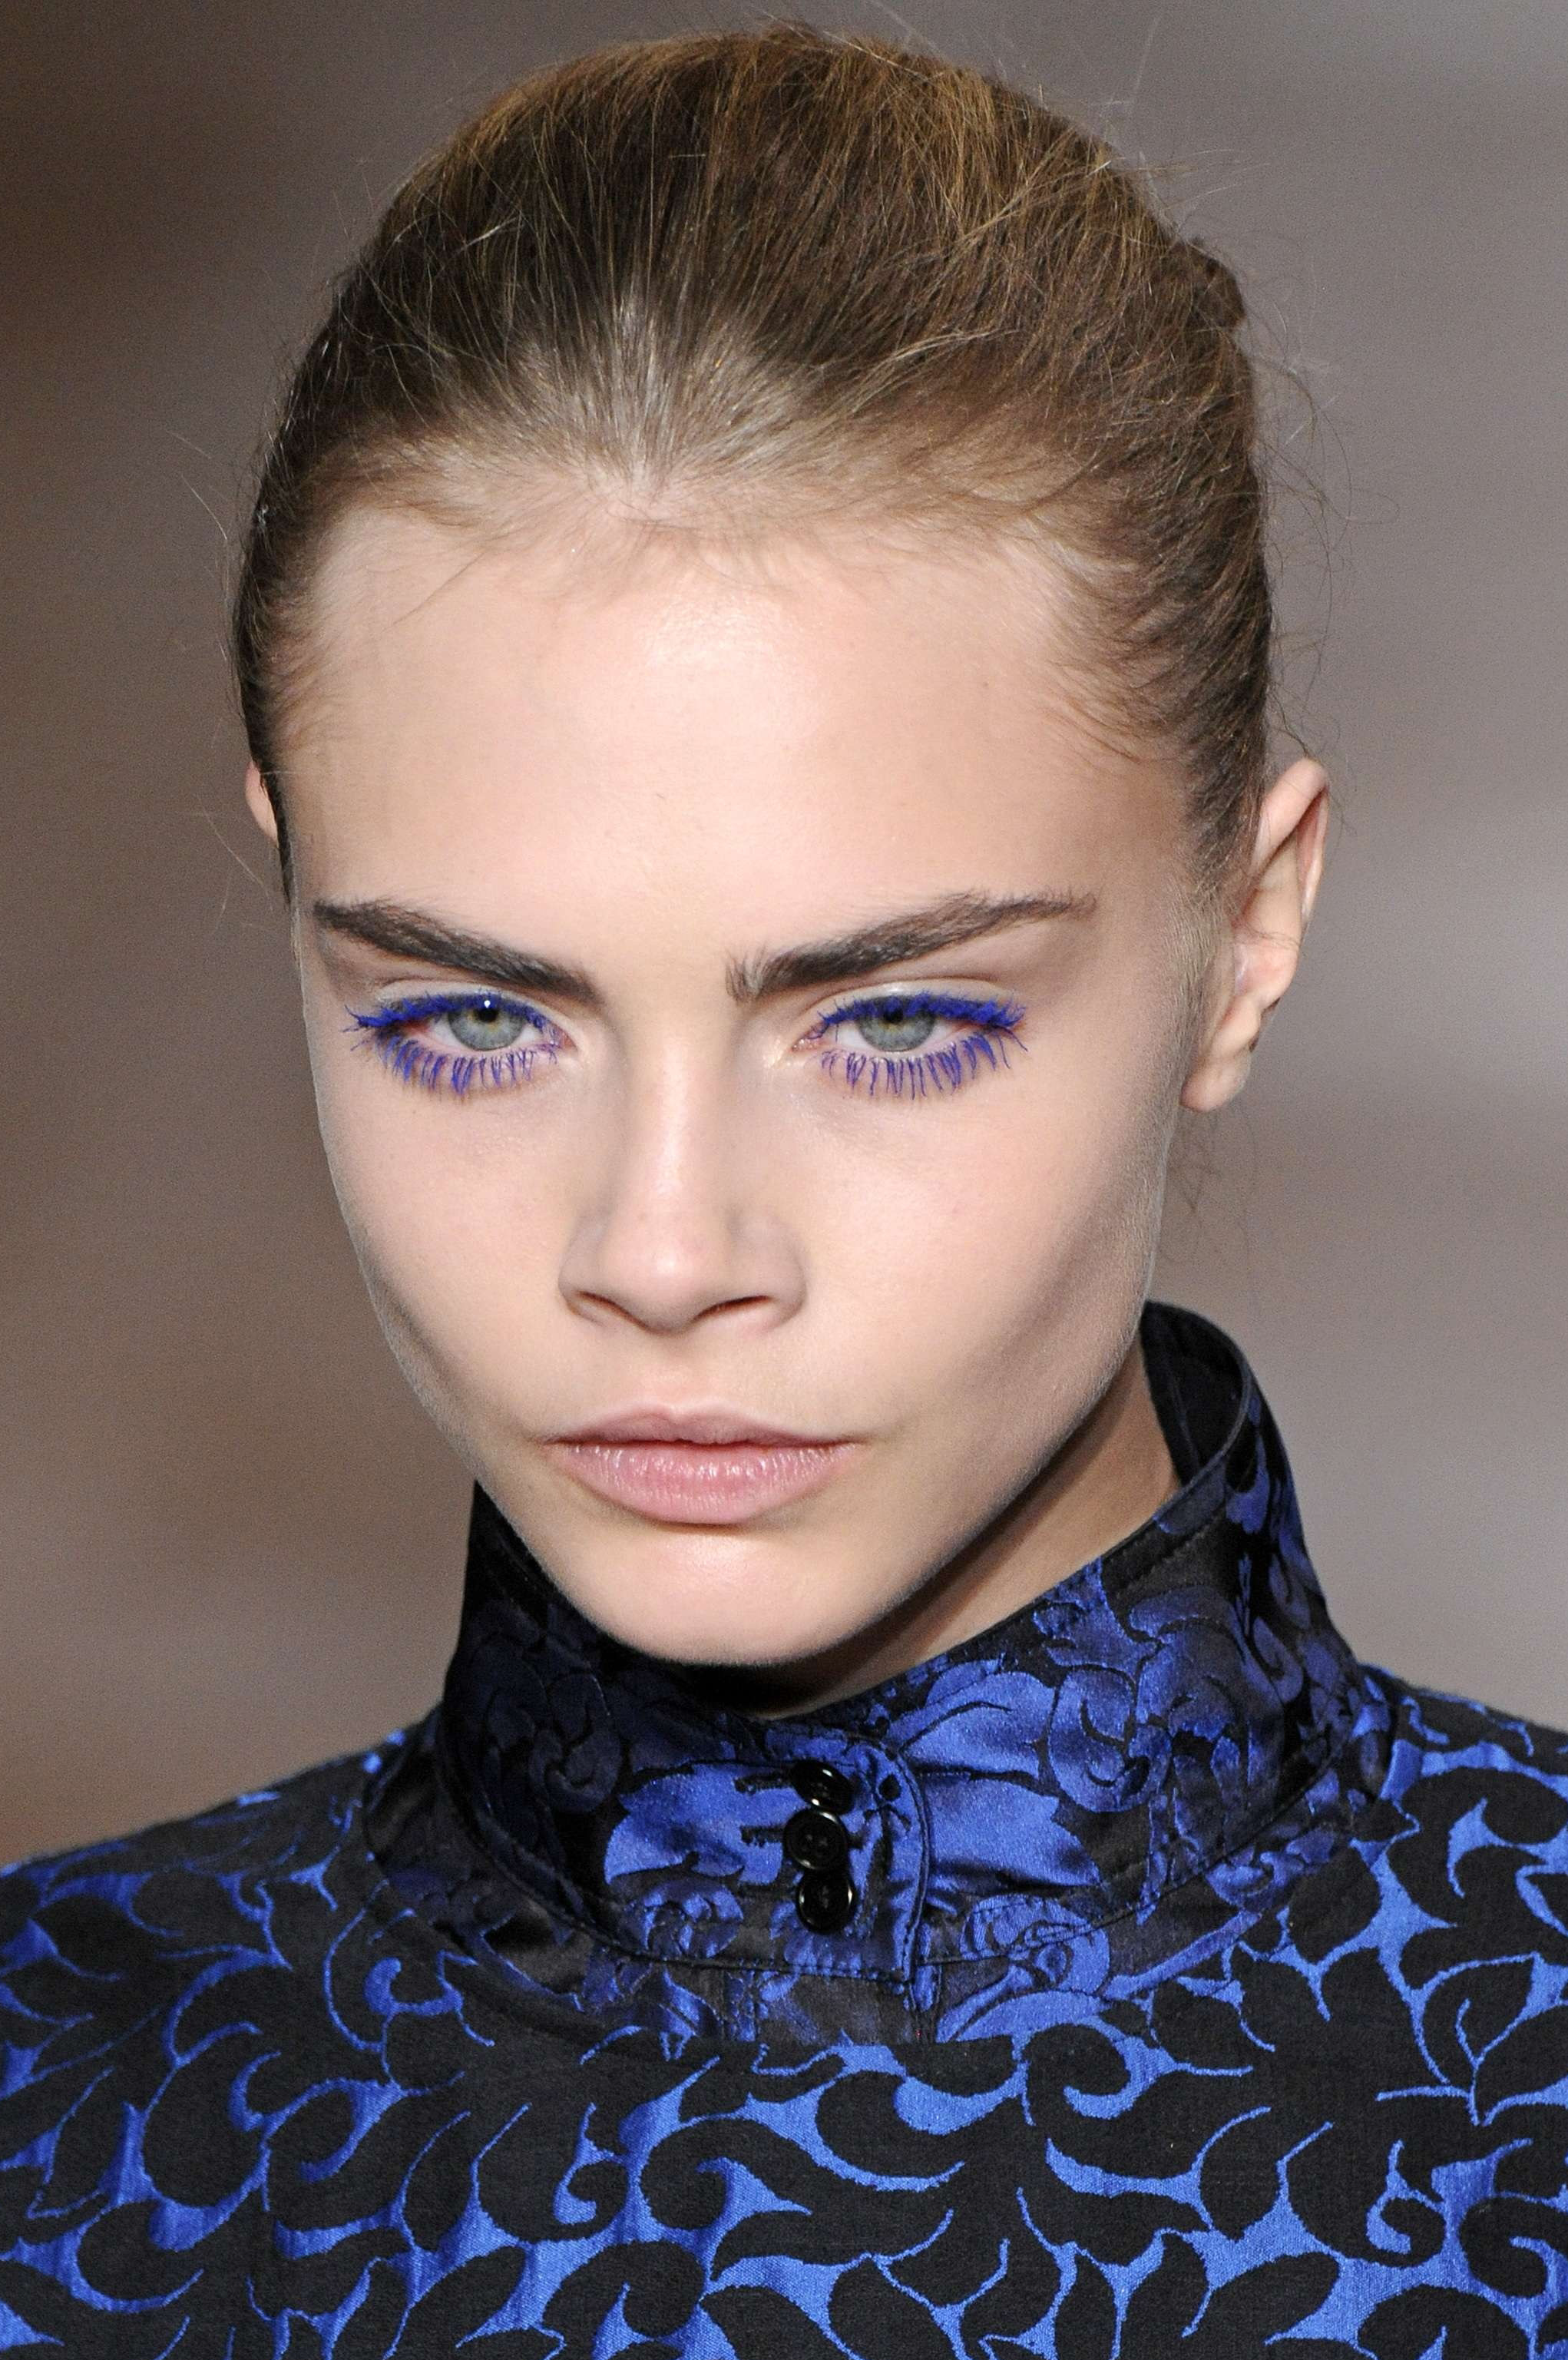 Cara Delevingne walks the runway during the Stella McCartney Ready-To-Wear Fall/Winter 2012 show as part of Paris Fashion Week on March 5, 2012 in Paris, France.